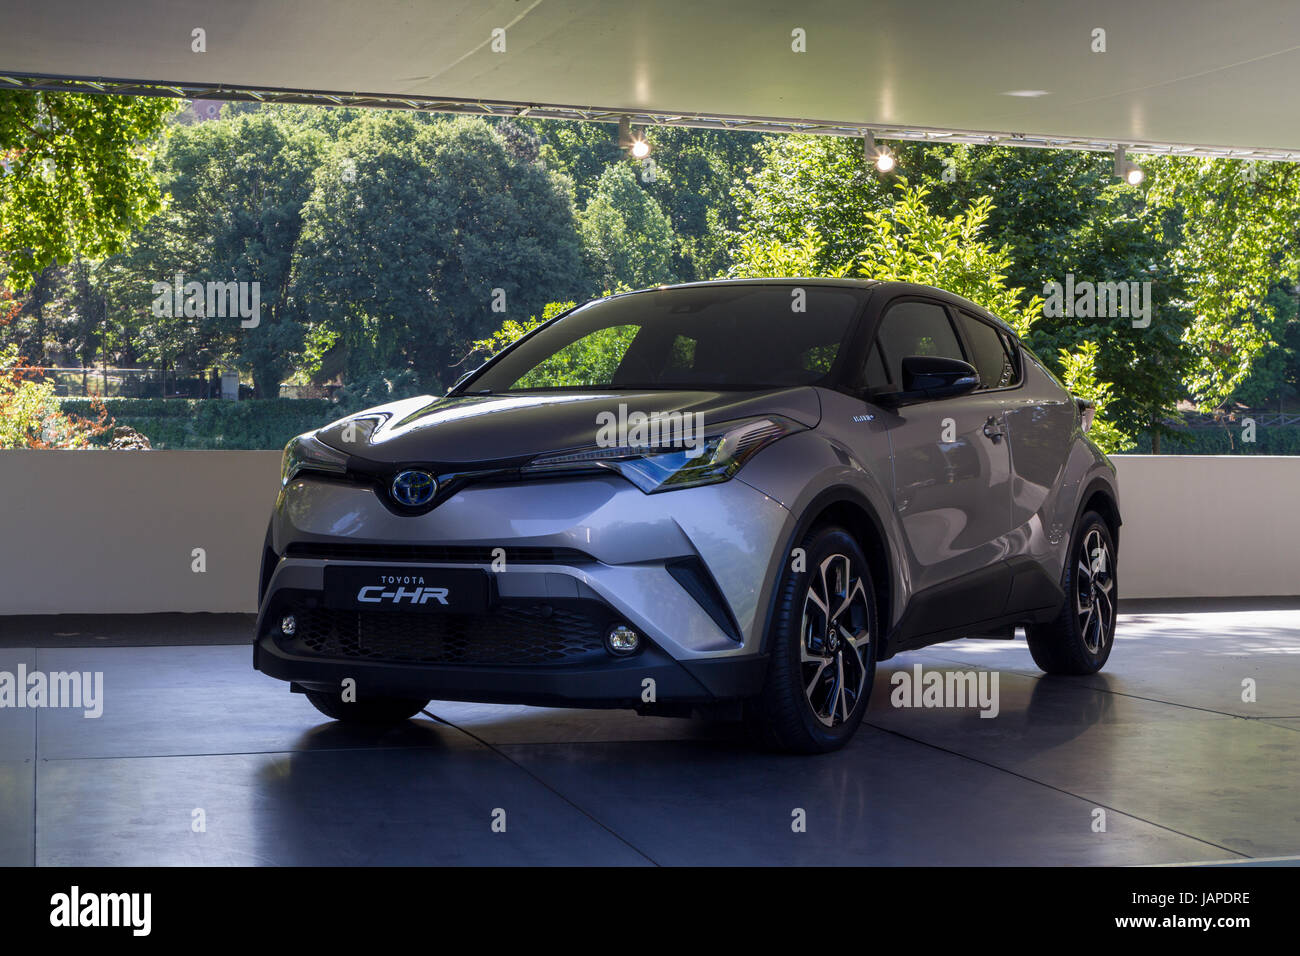 Turin, Italy, 7th June 2017. A Toyota C-HR. Third edition of Parco Valentino car show hosts cars by many automobile manufacturers and car designers inside Valentino Park in Torino, Italy. Stock Photo